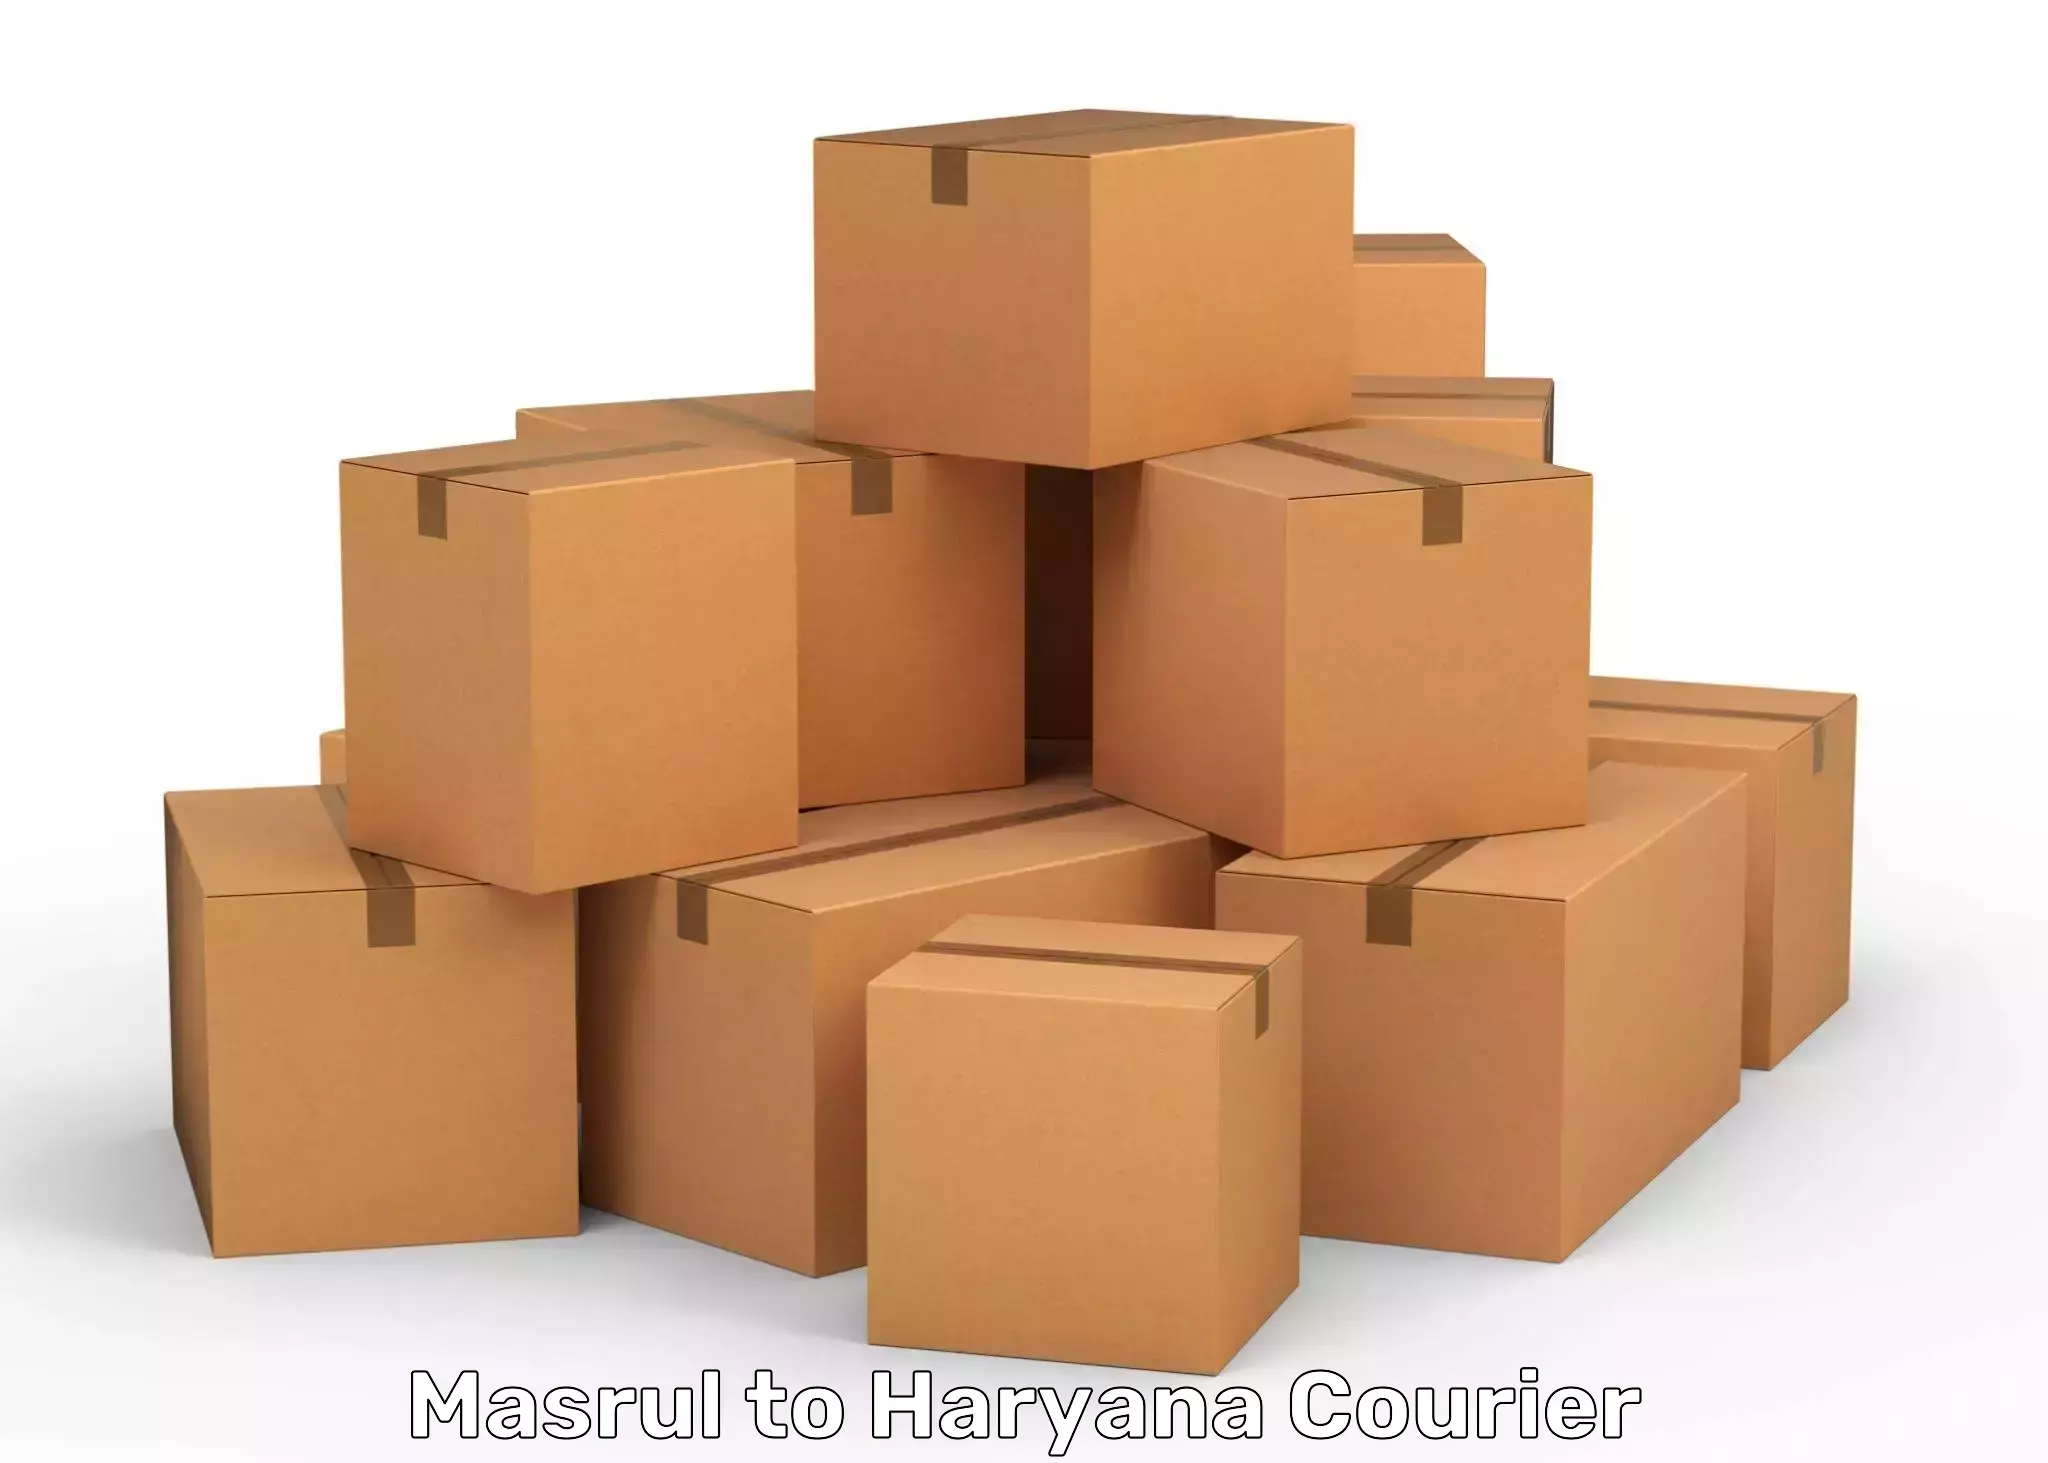 Courier service comparison Masrul to NCR Haryana